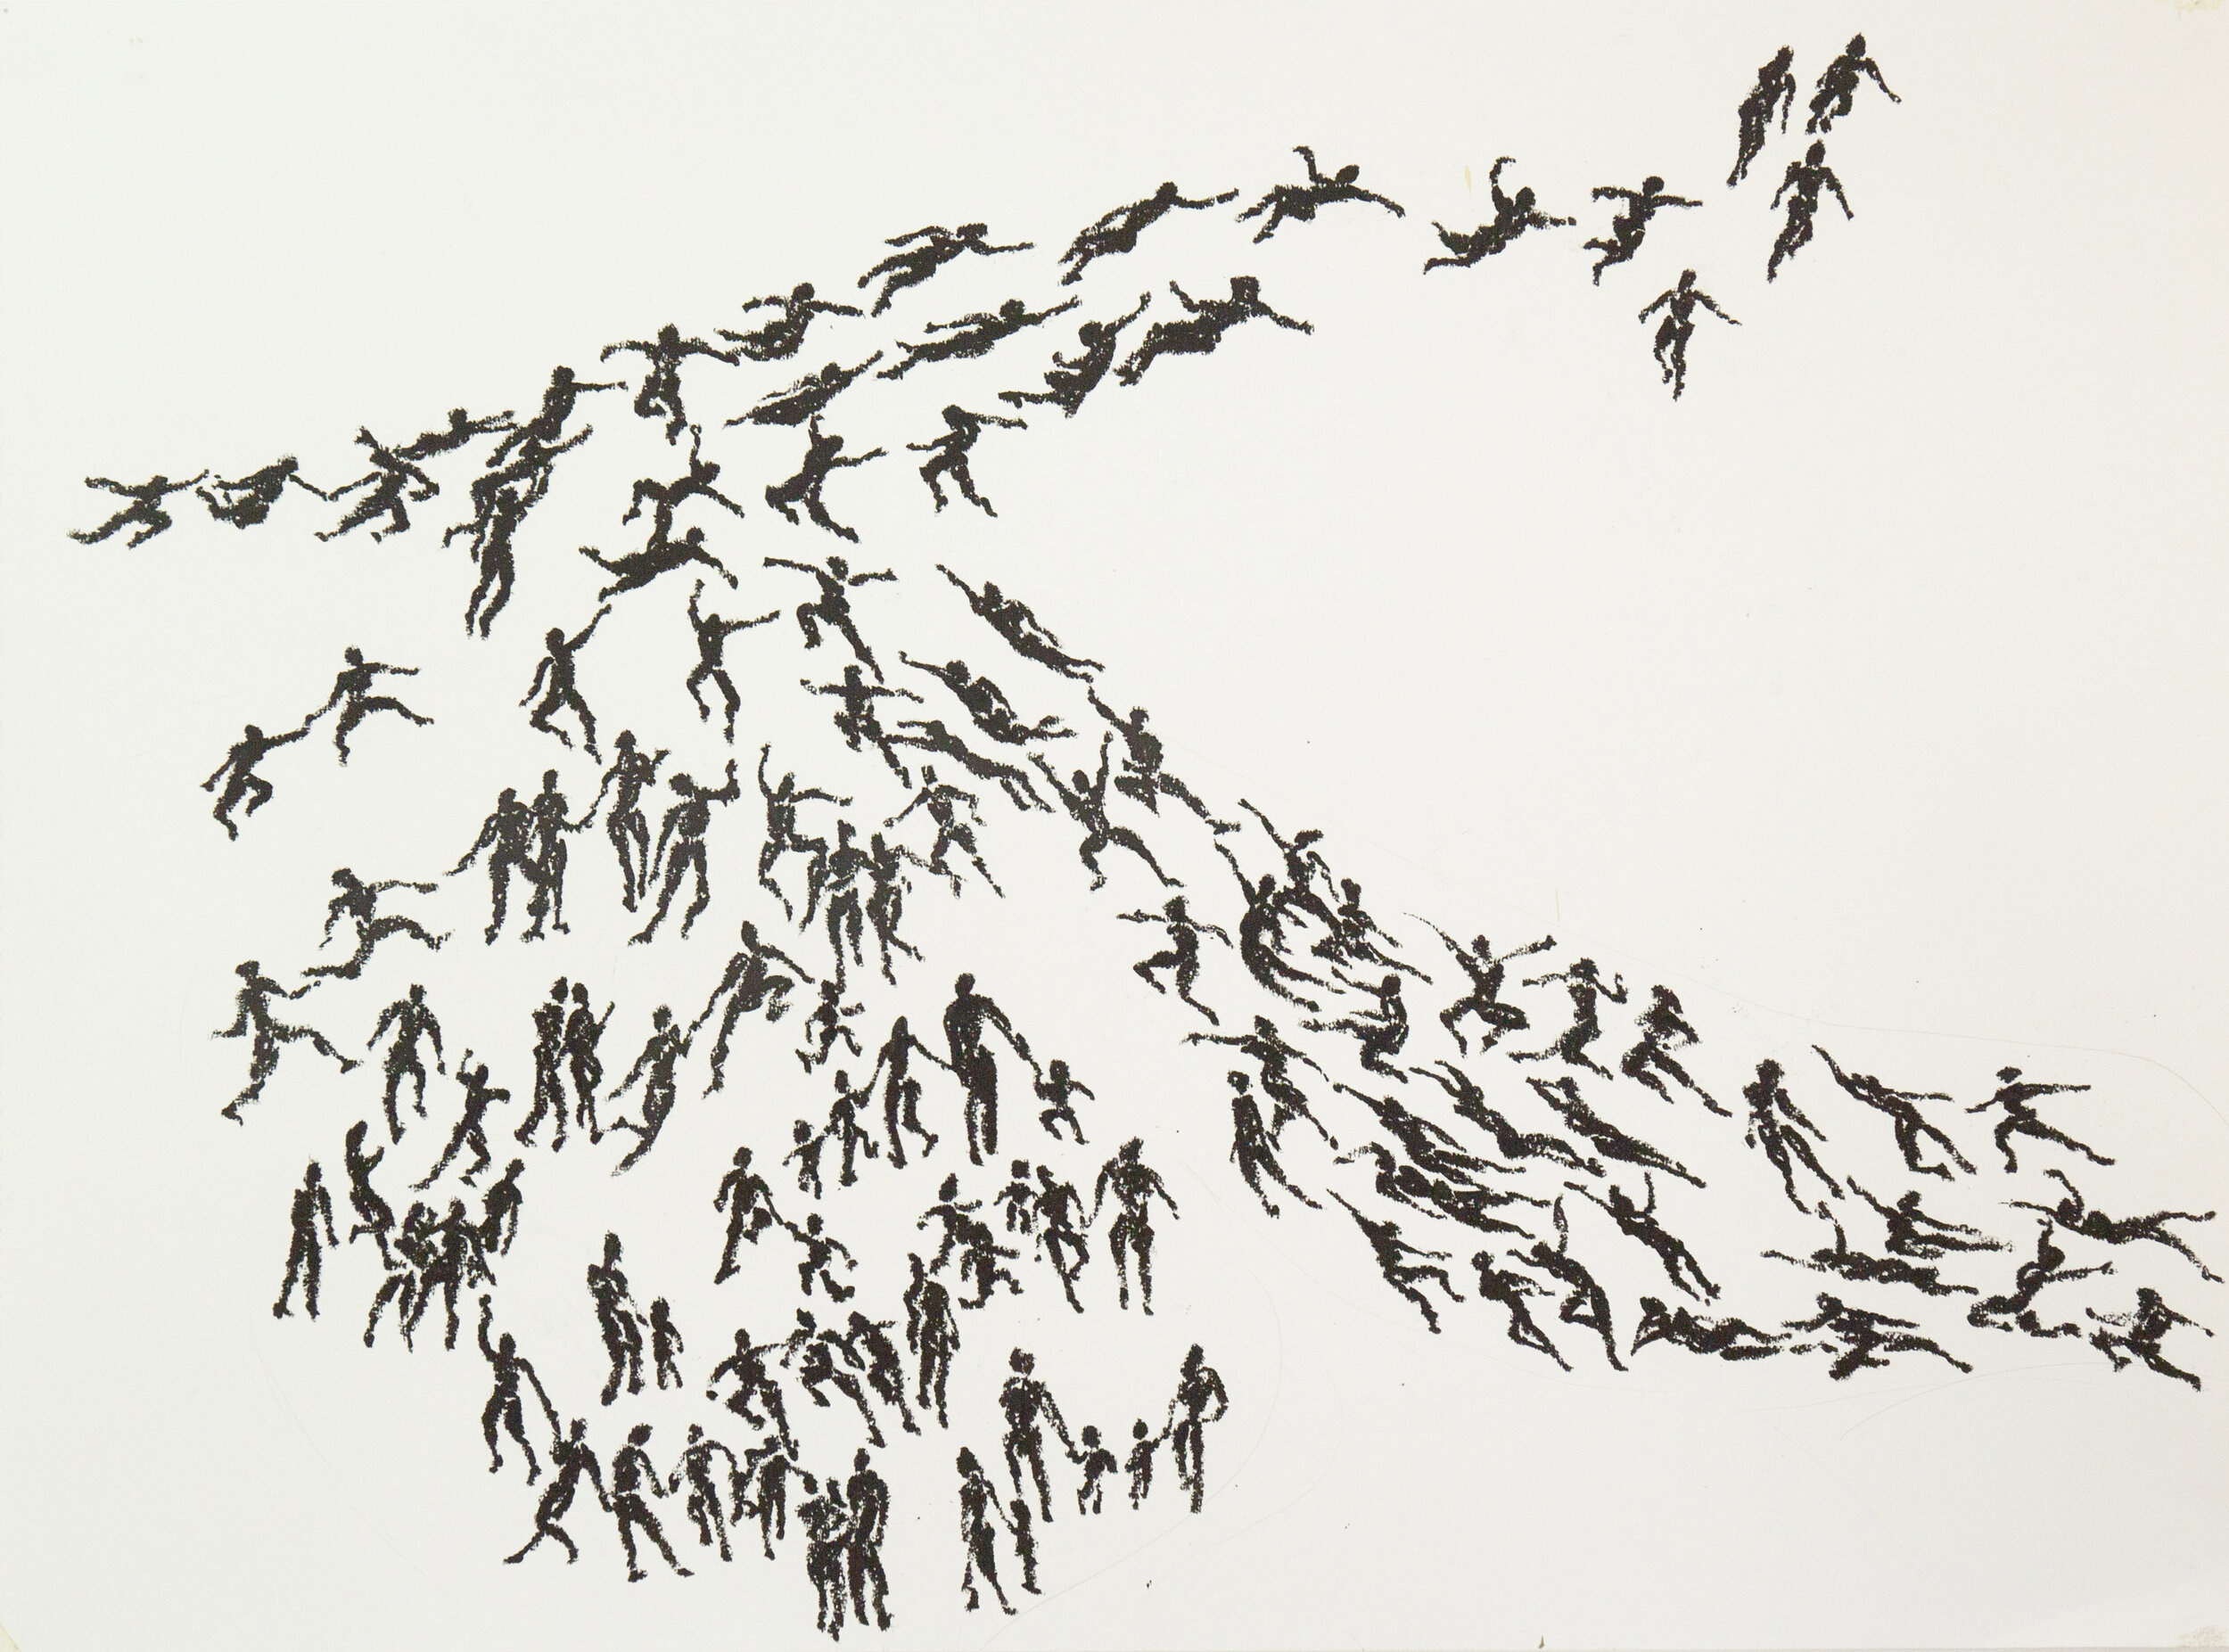  Han Qin,  Form of travel(drawing) 2 , 2018. Chalk Marker, 18 x 24 inches ©Han Qin, courtesy Fou Gallery 